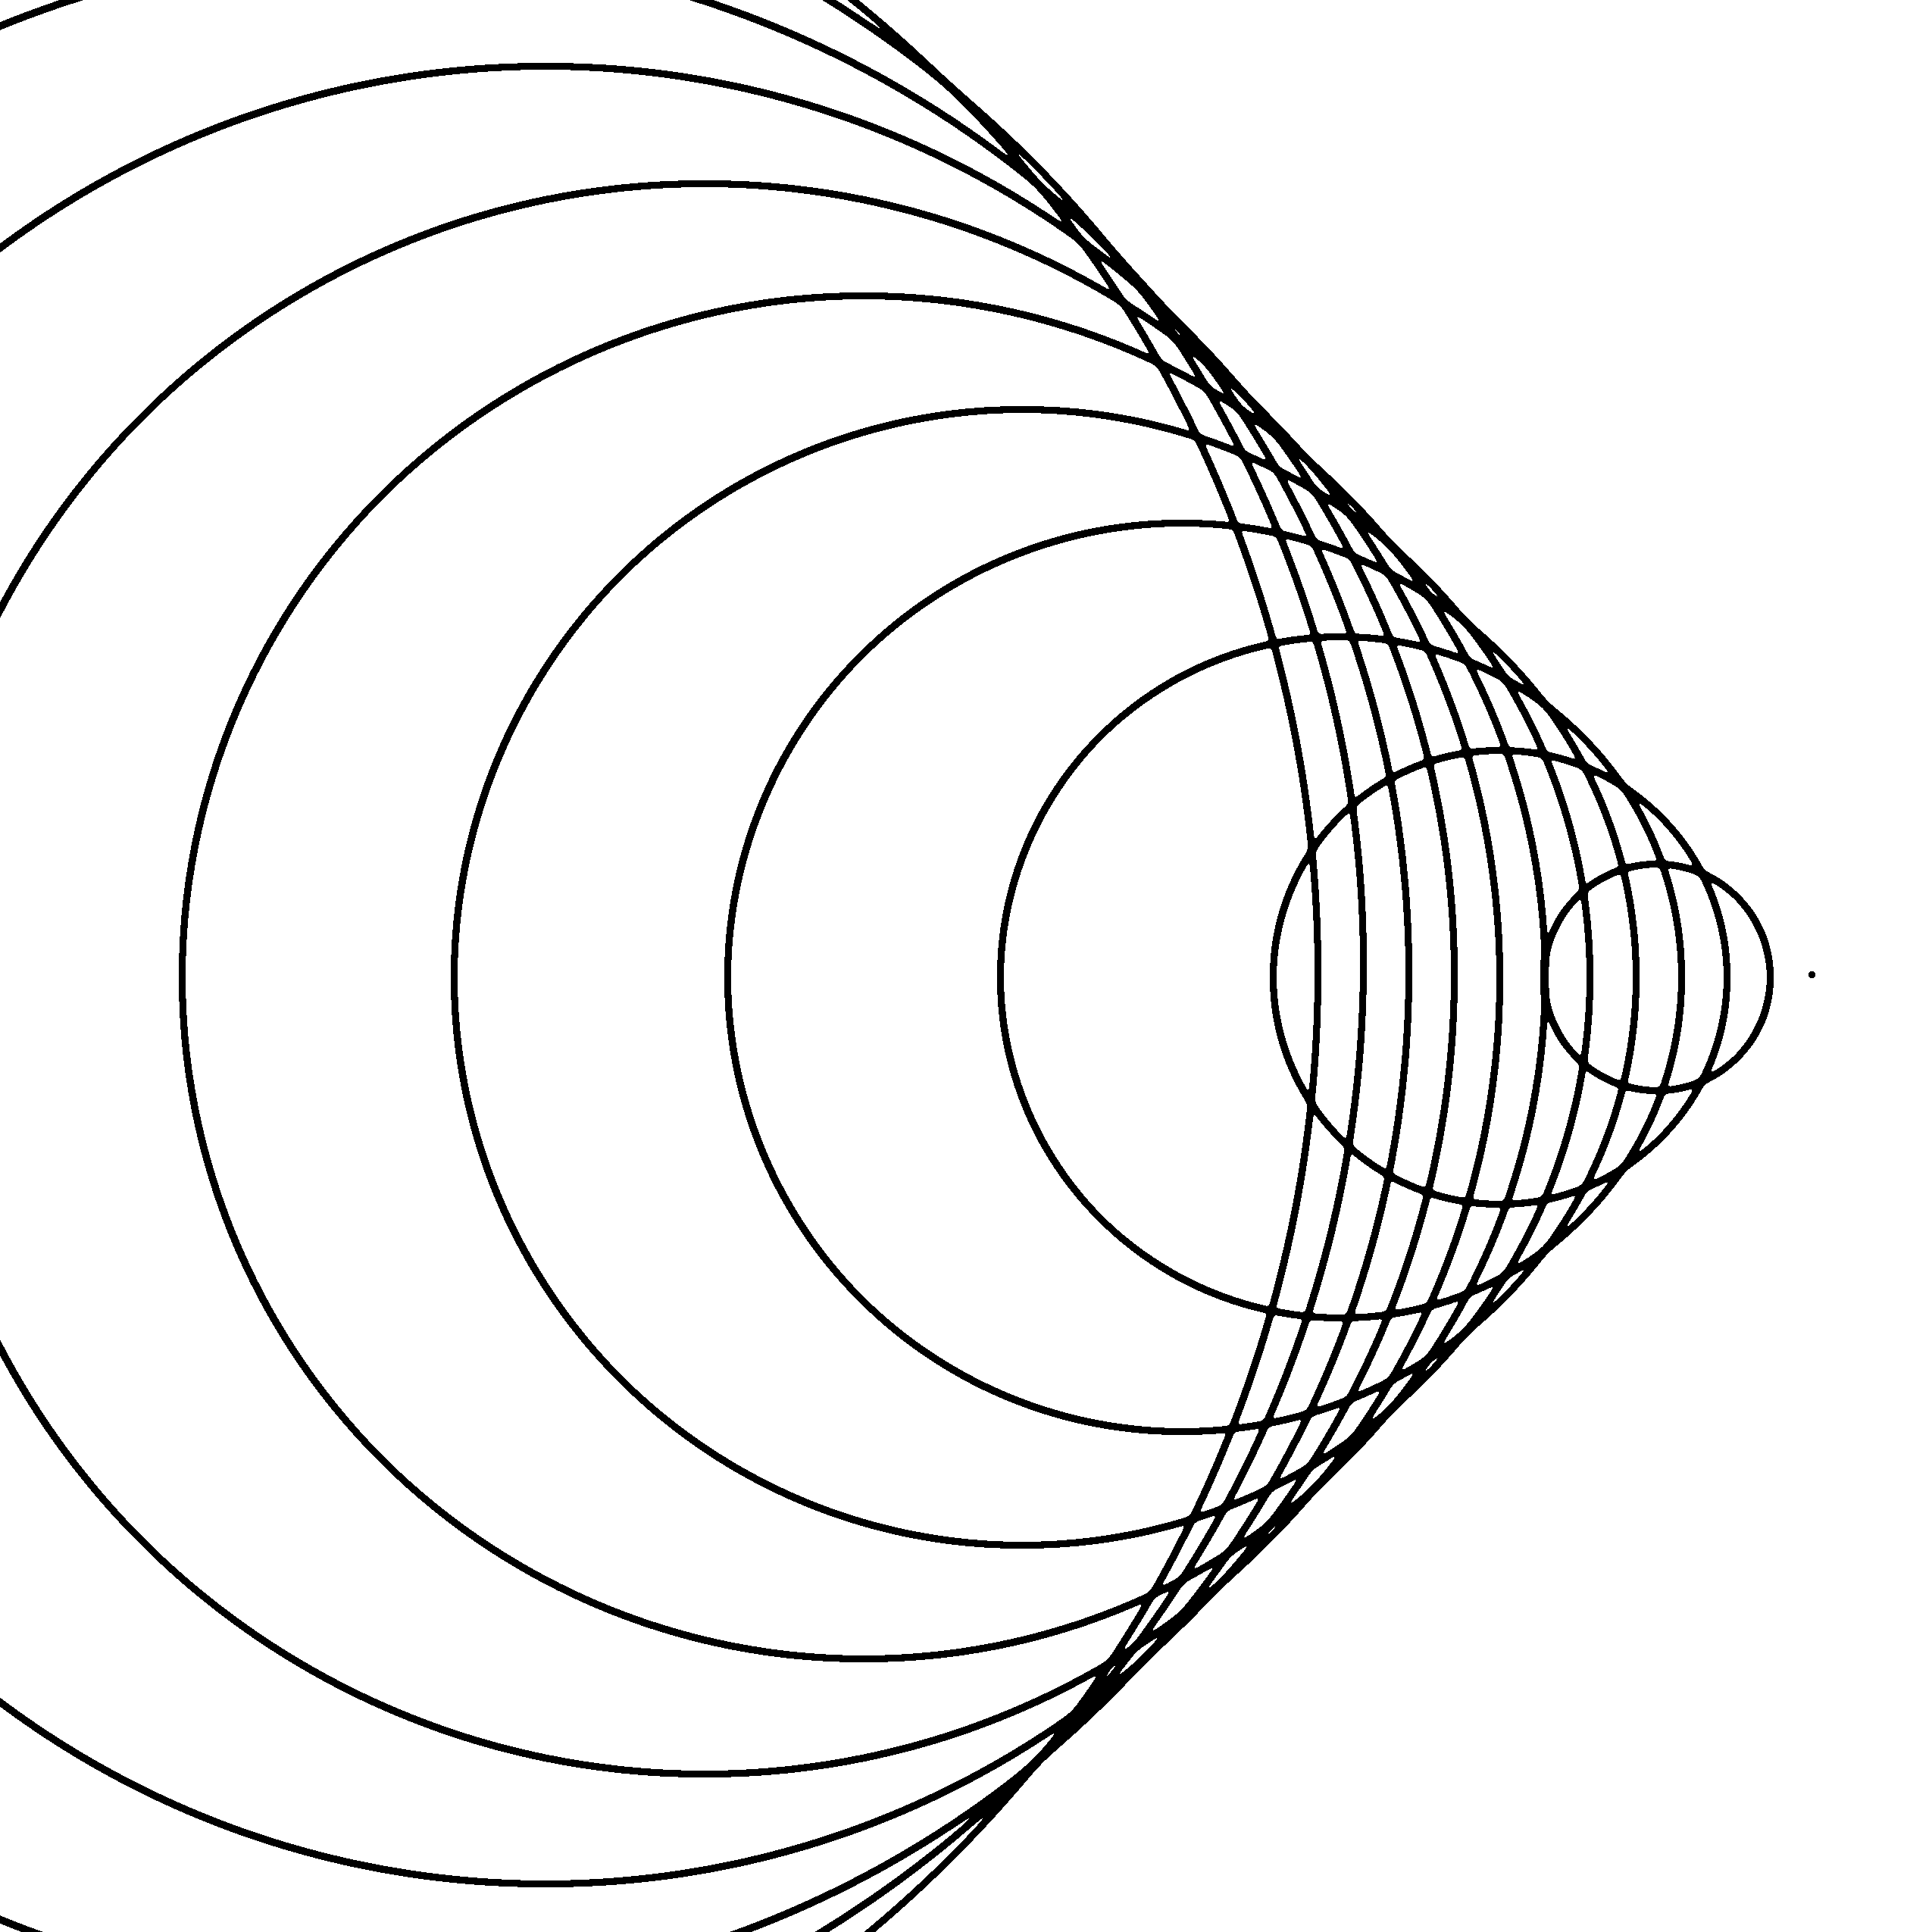 Sound drawing at getdrawings. Waves clipart wave physics